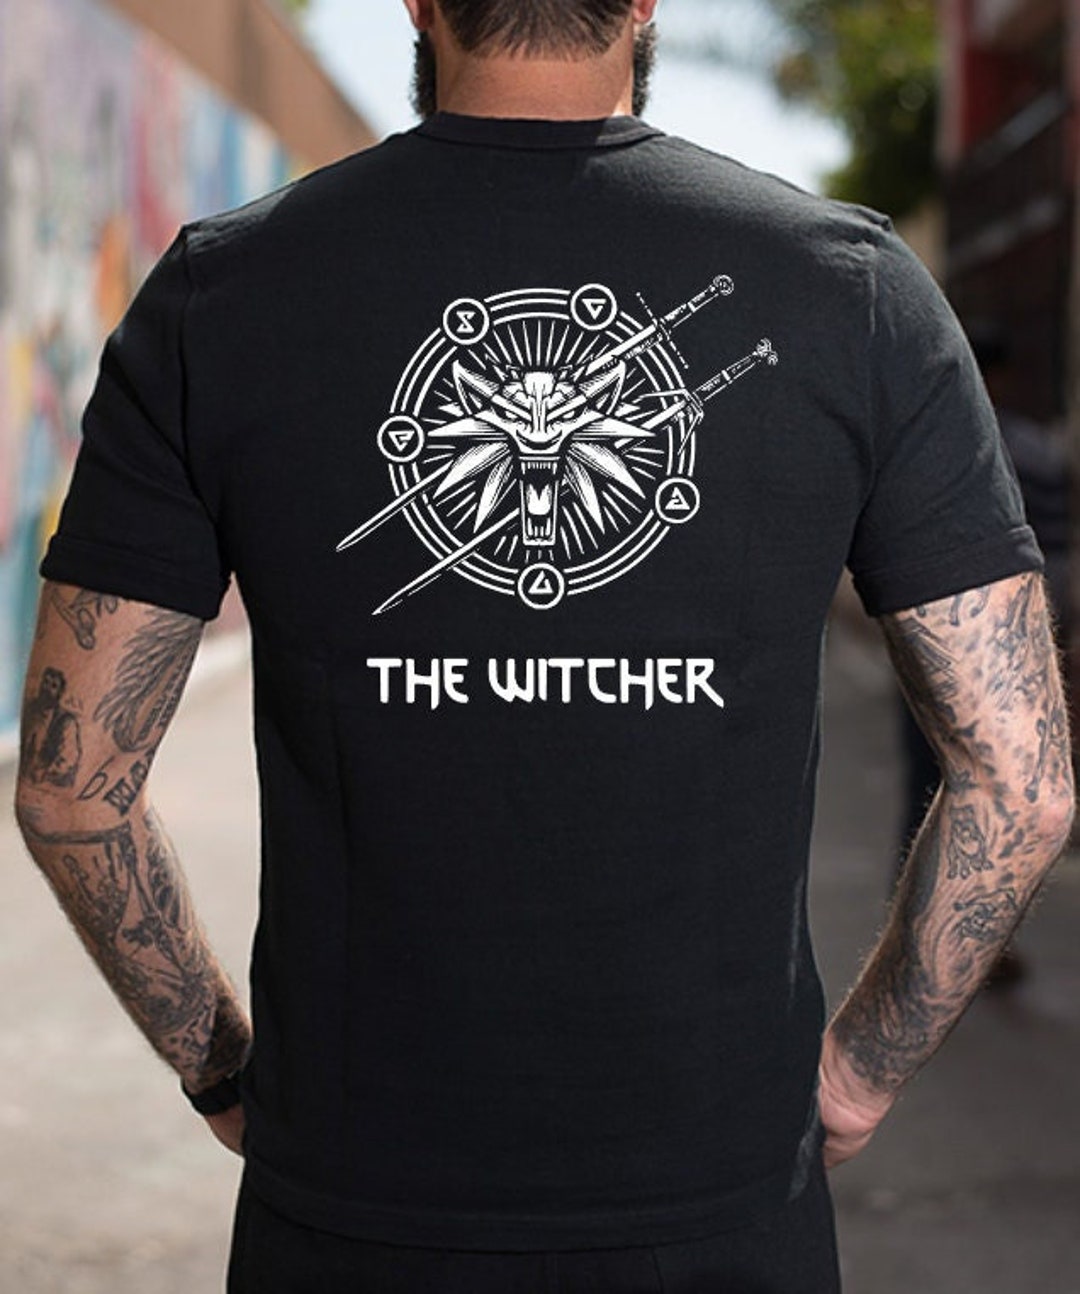 The Witcher T-shirt - Etsy